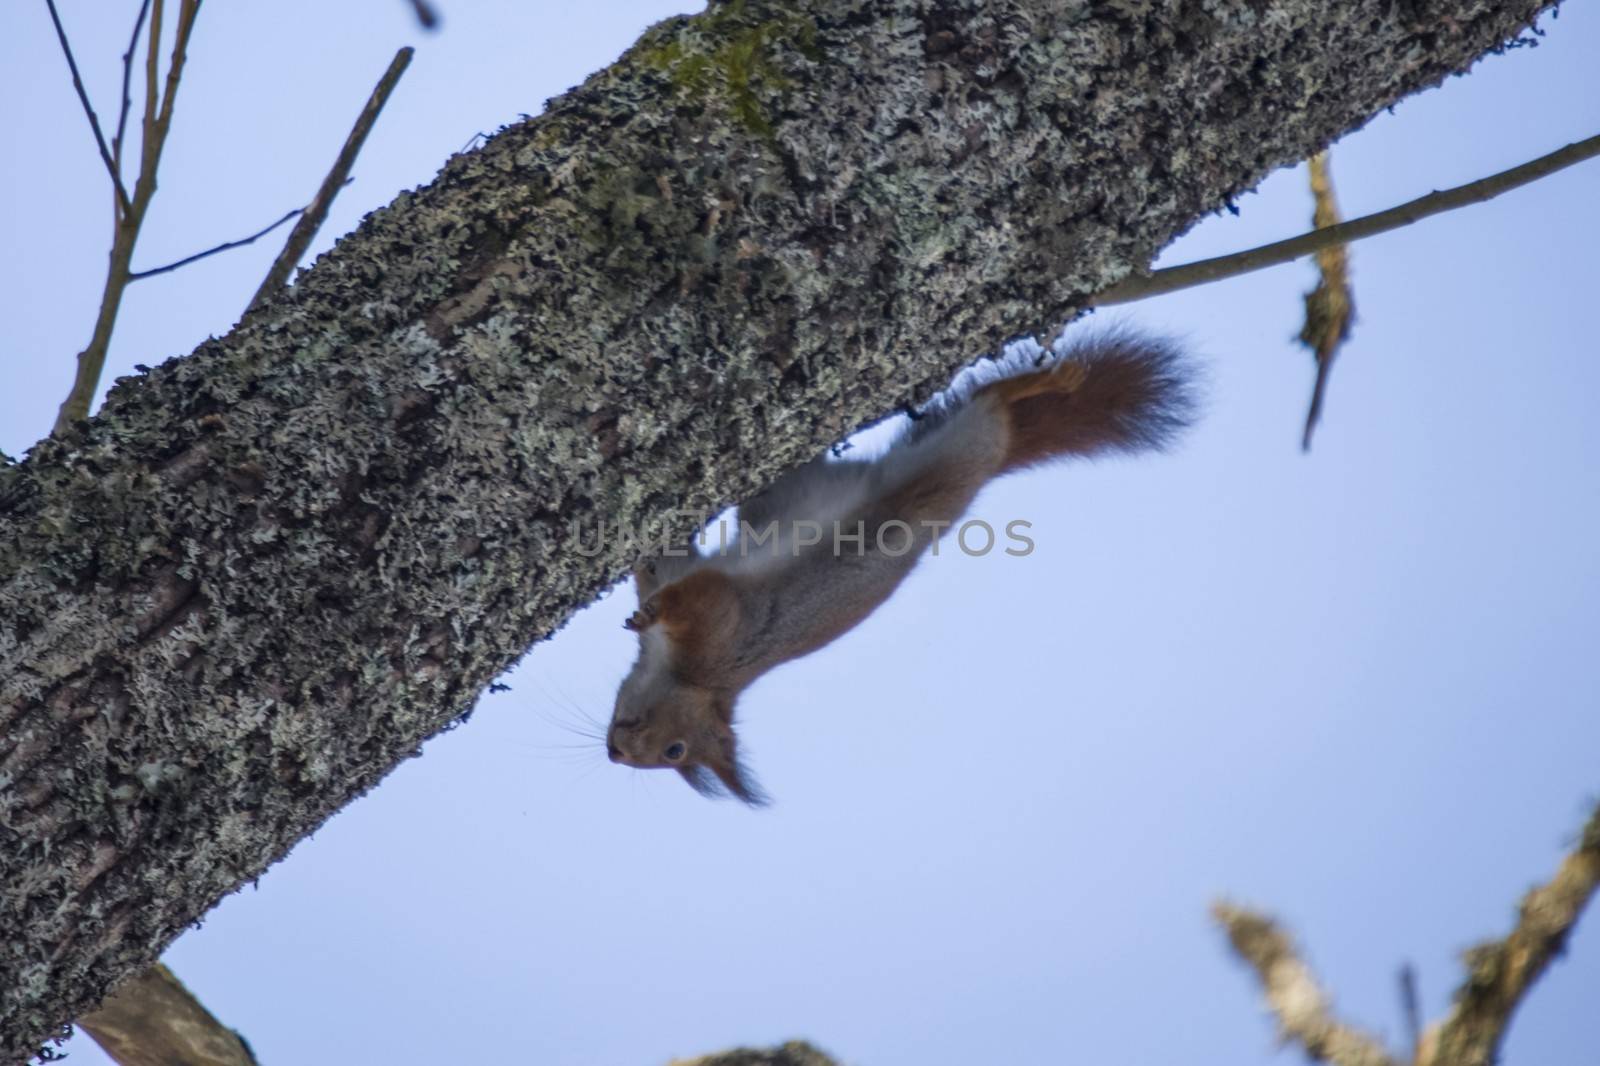 squirrels running upside down on the branch by steirus